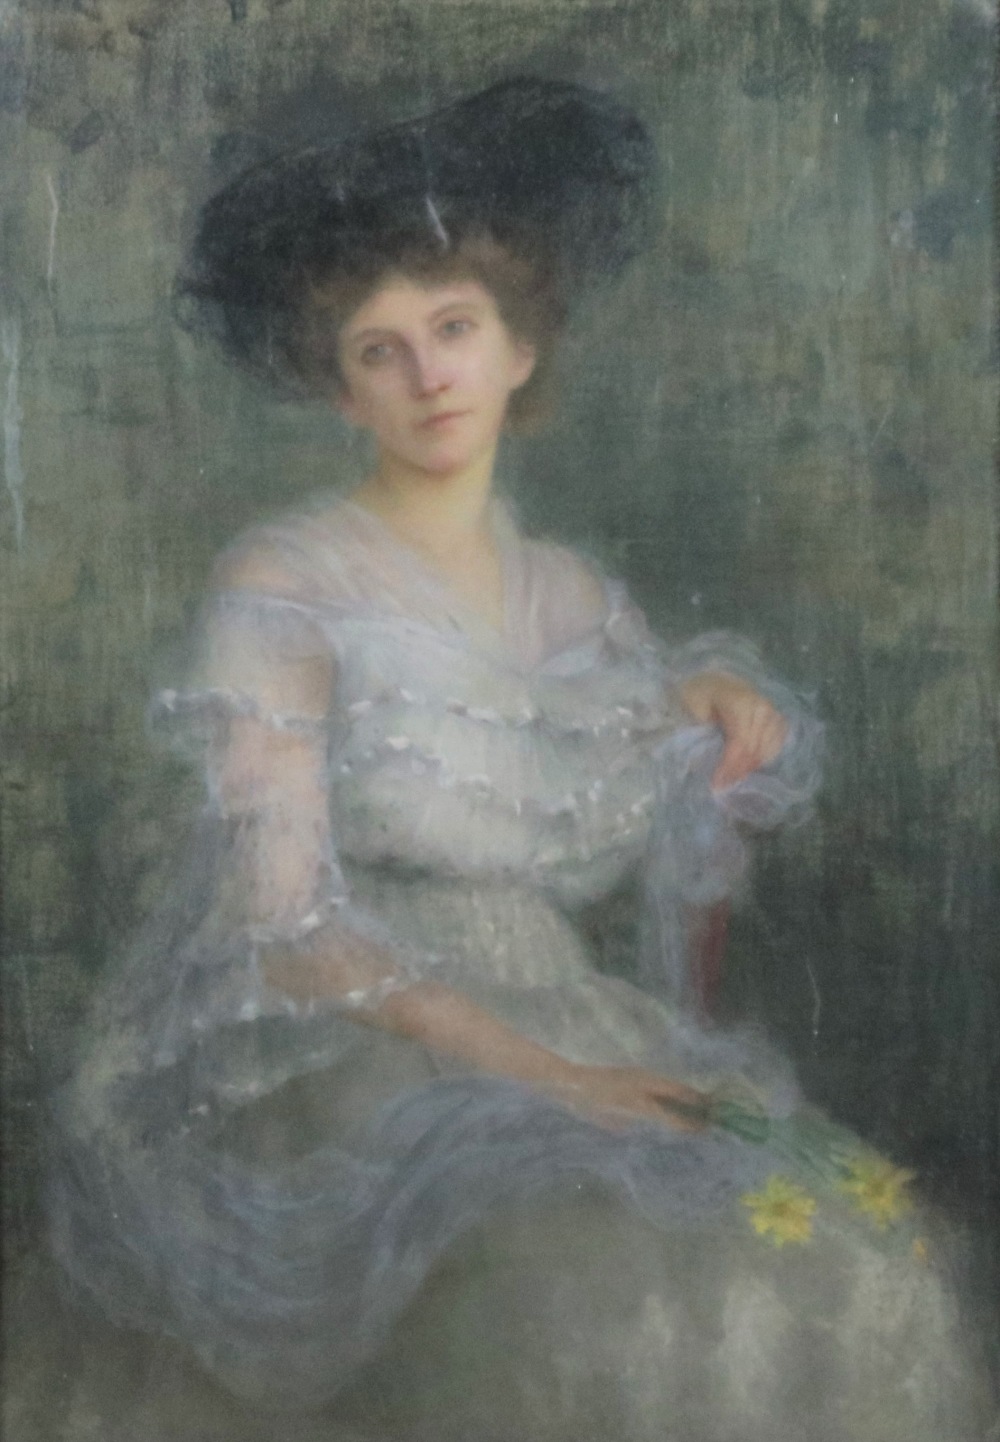 In the Manner of Philip de Laszlo (1869 - 1937) "Portrait of an elegant Lady seated,